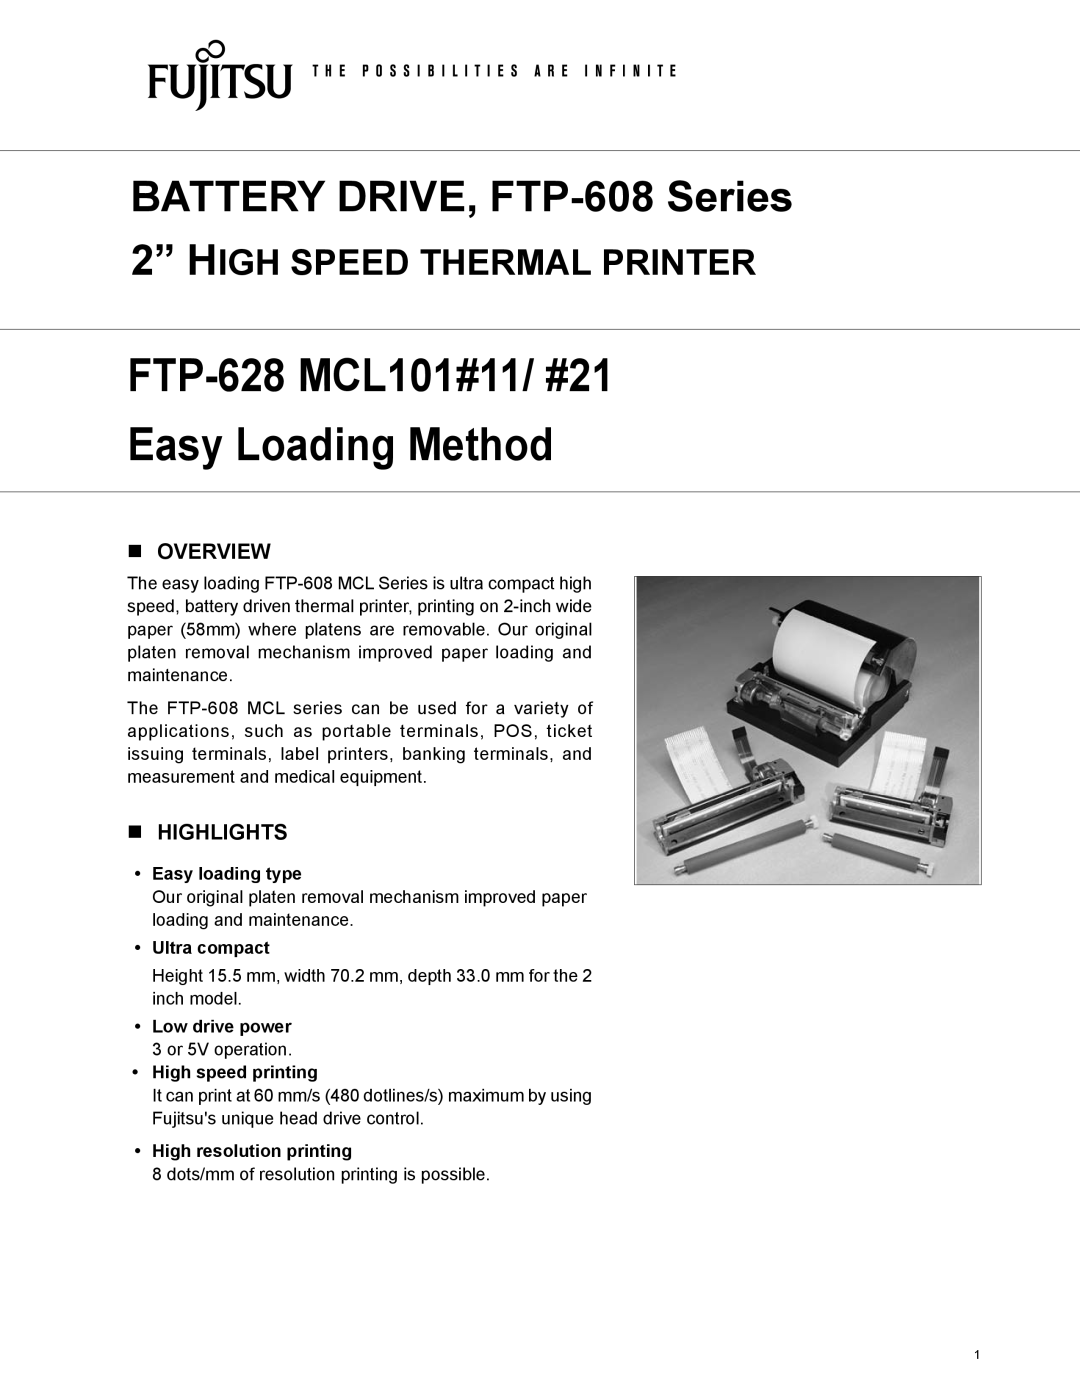 Fujitsu FTP-628 MCL101#21 manual n Overview, n HIGHLIGHTS, Easy loading type, Ultra compact, Low drive power 